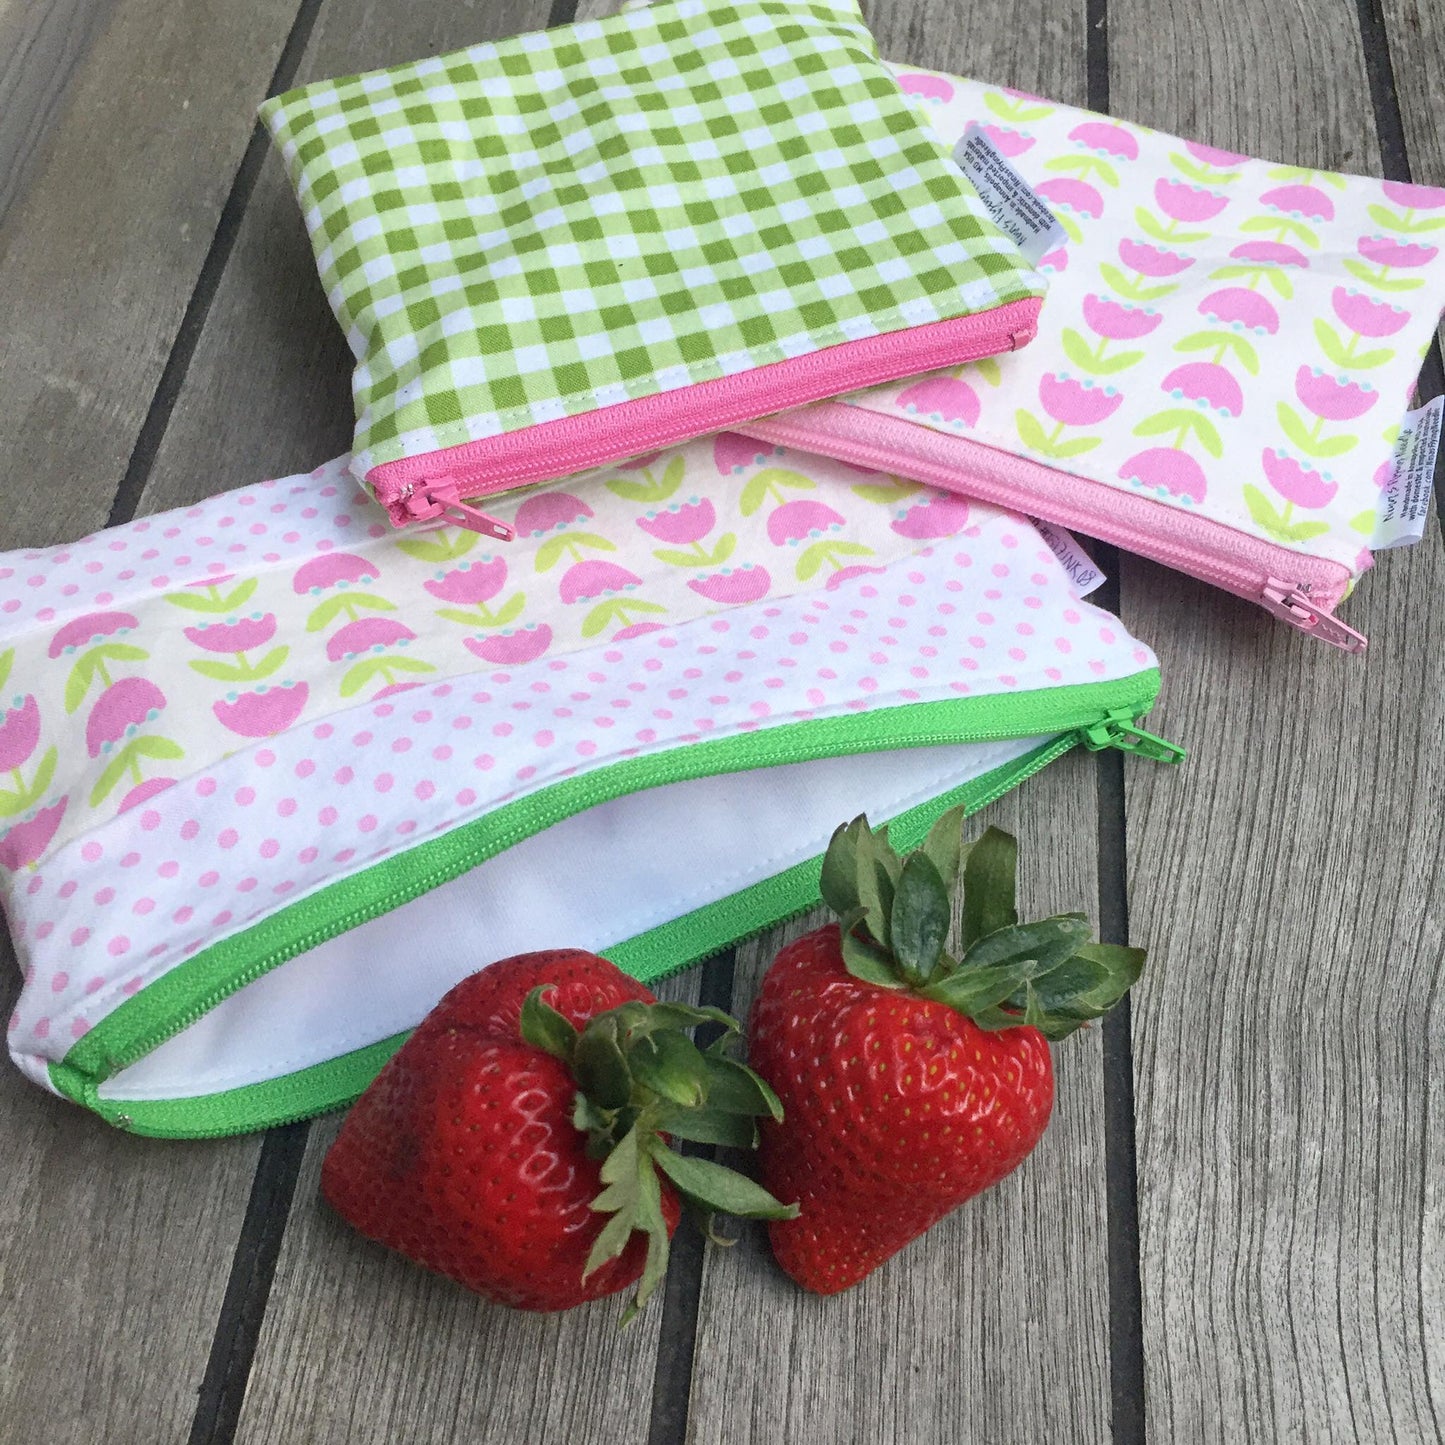 Snack Sized Reusable Zippered Bag Solid Lavender